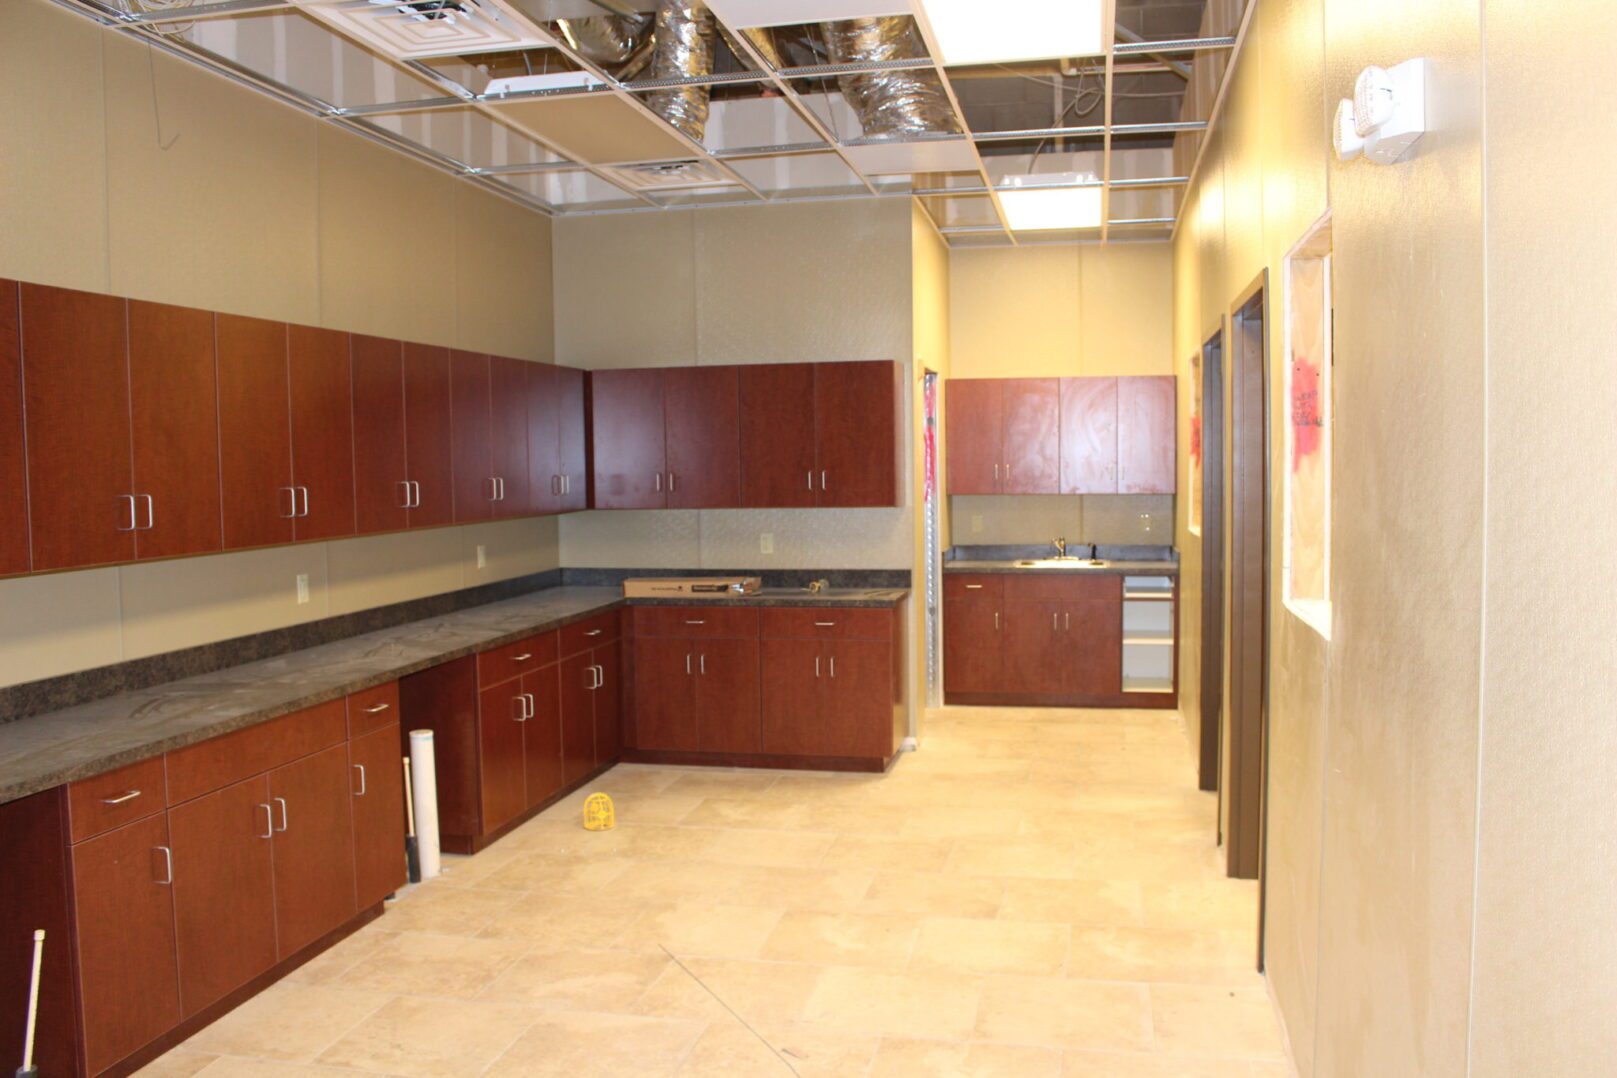 A kitchen with brown cabinets and tile floors.